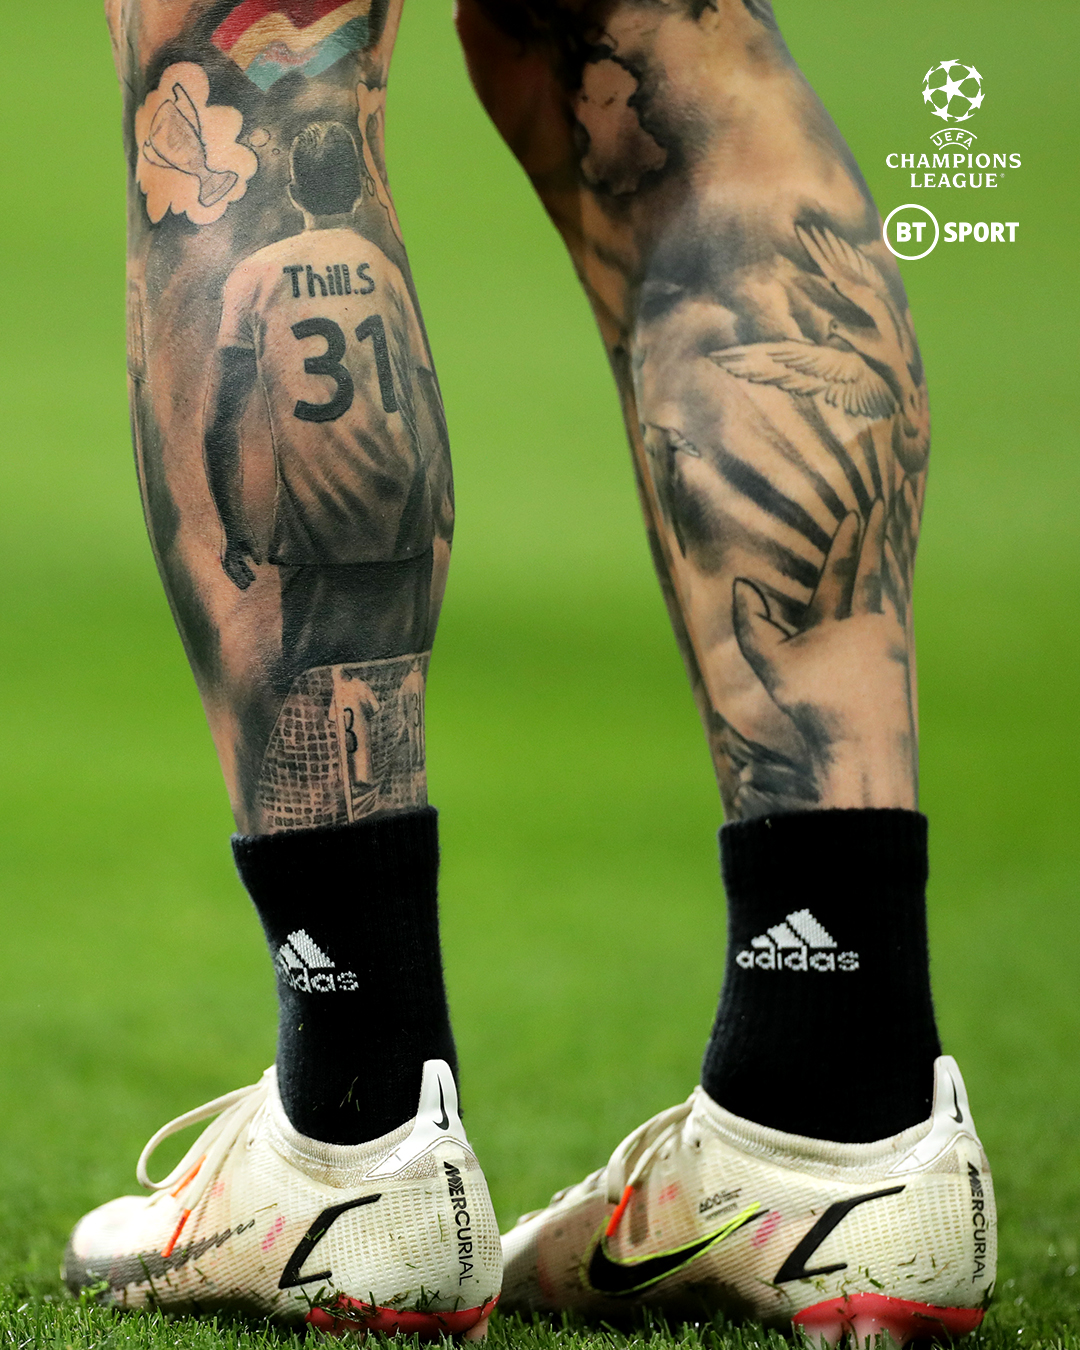 World Cup 2014 Mauricio Pinillas crossbarinspired tattoo was bad but  who has the worst ink in Brazil  The Independent  The Independent